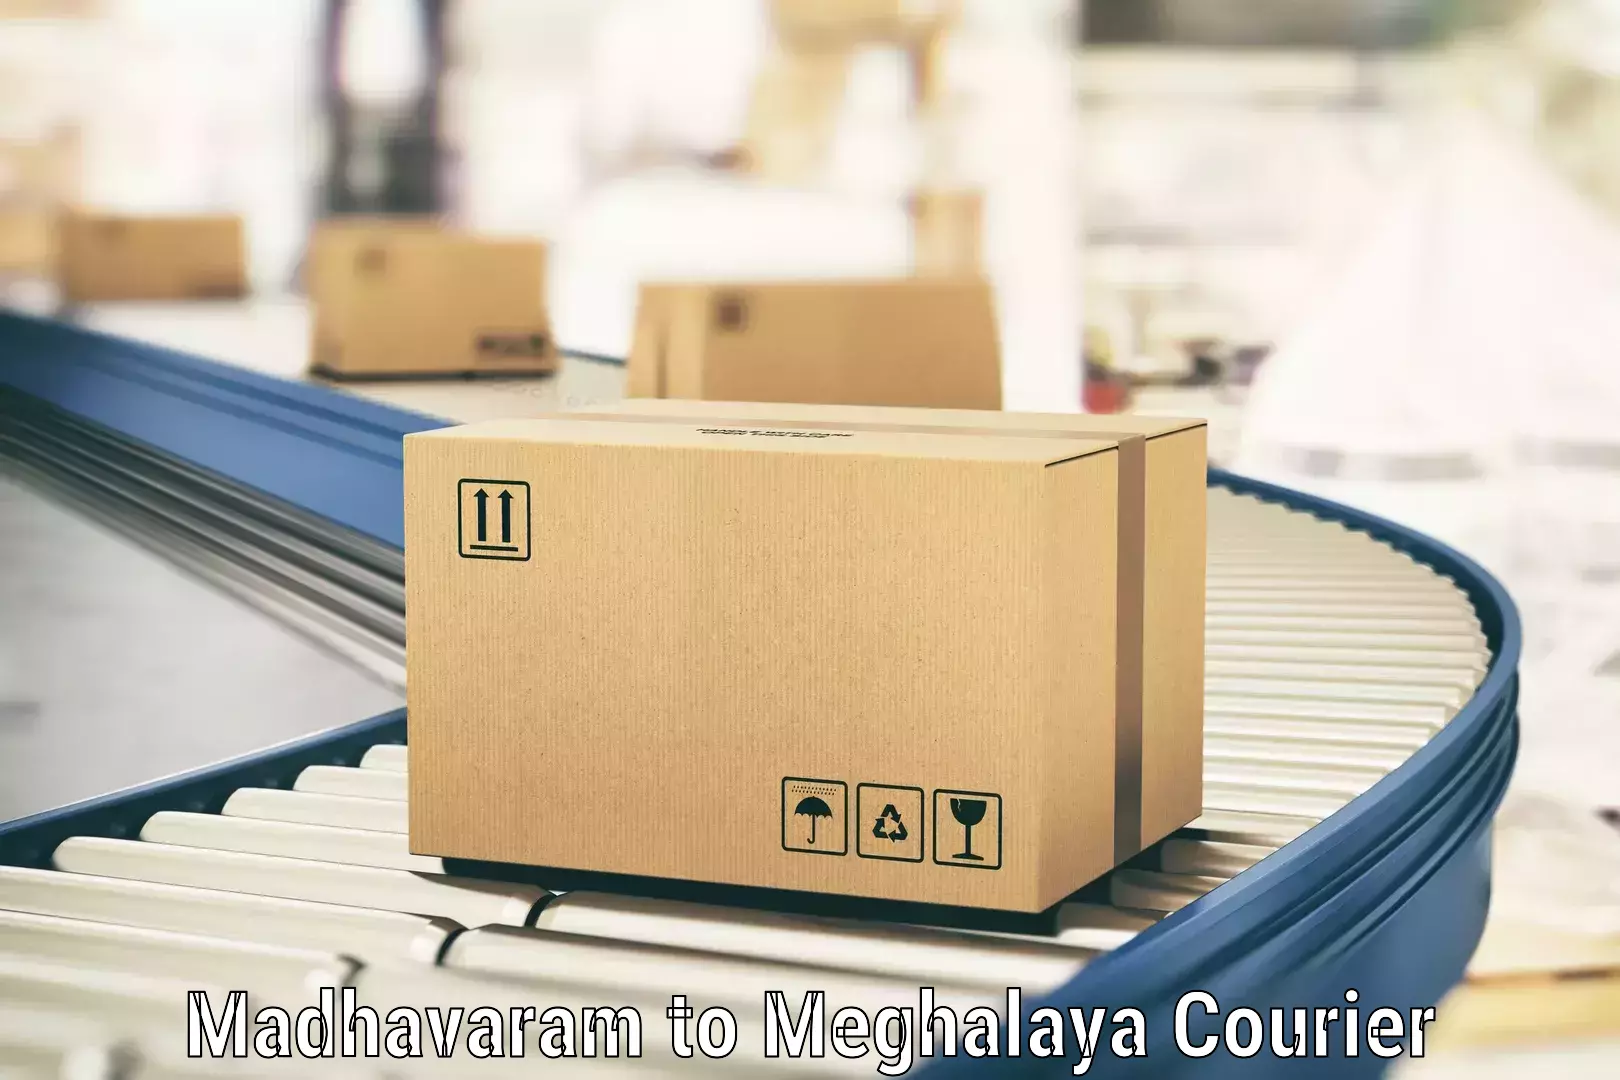 State-of-the-art courier technology in Madhavaram to Tura